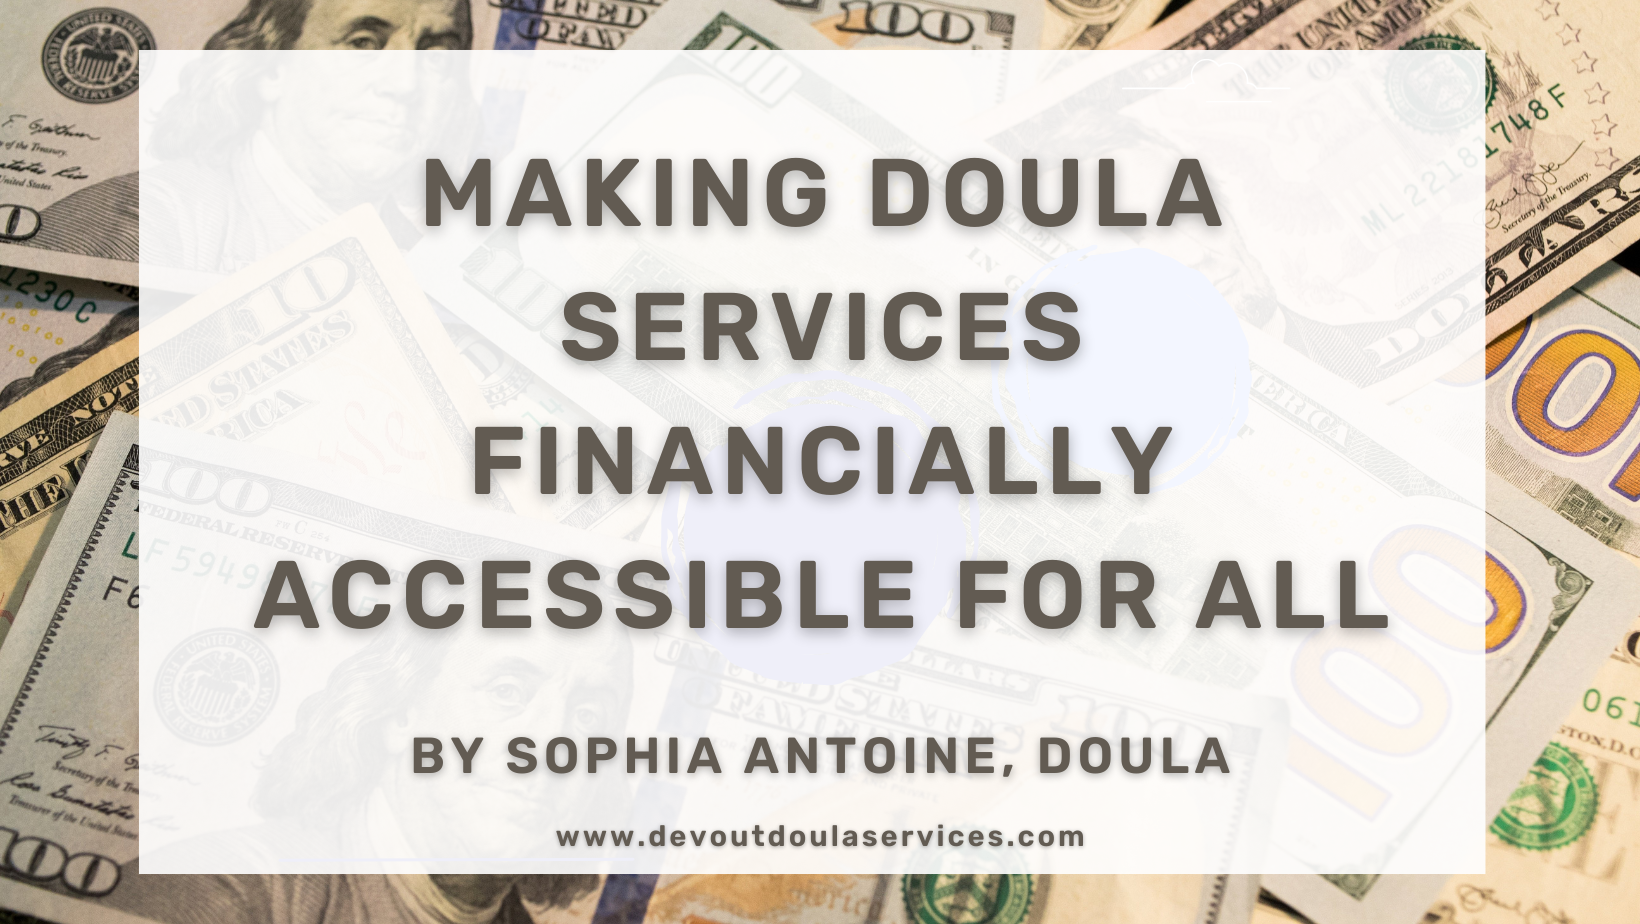 Making doula services accessible for all, regardless of their financial situation.